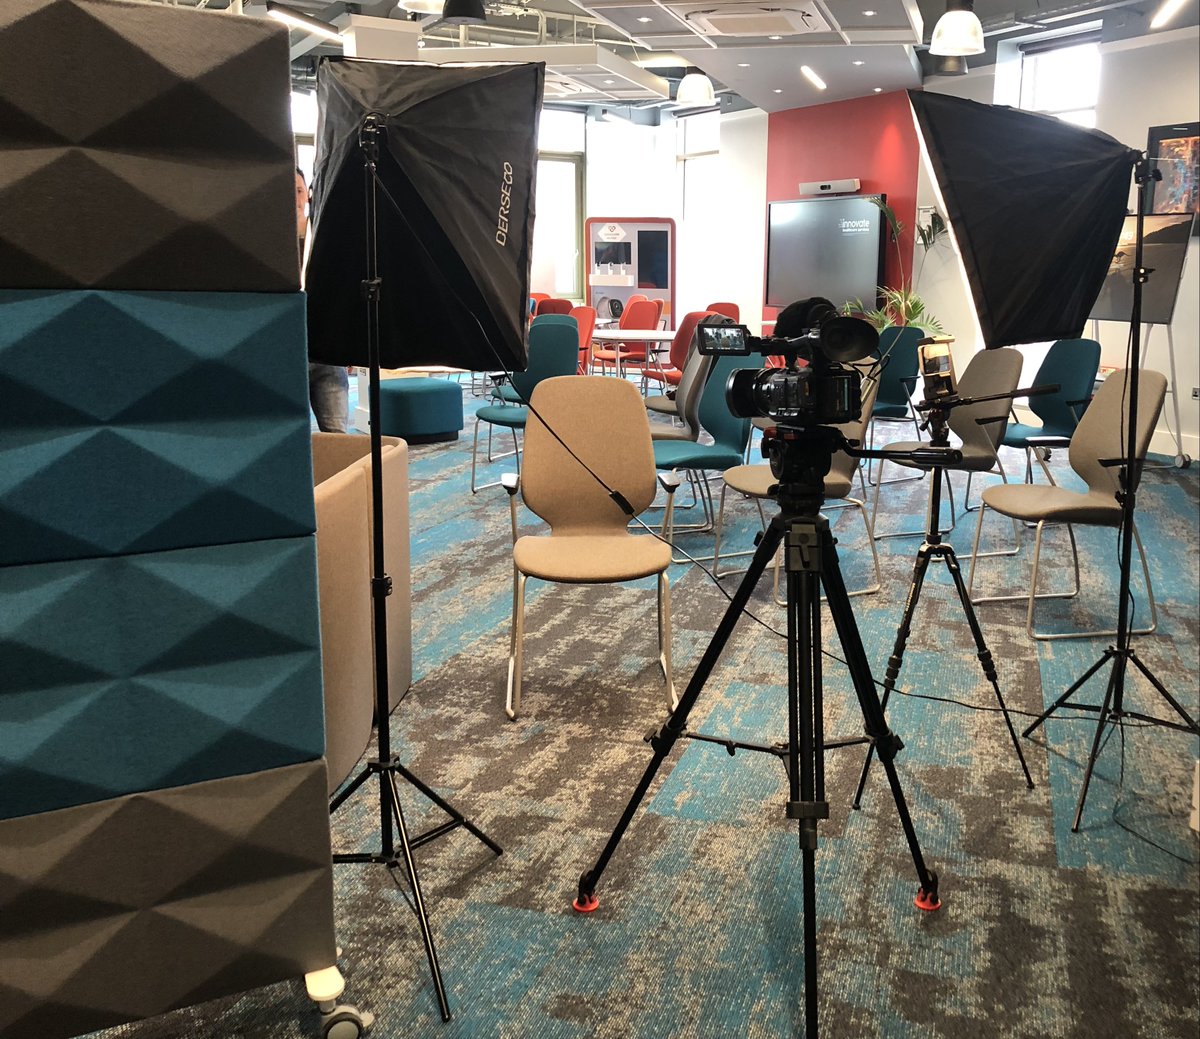 A quick glimpse  behind the scenes at our recent filming session where the participants talked about what it’s like to work for Innovate. This was a fantastic and unique experience for everyone involved. Keep a look out for the finished piece!